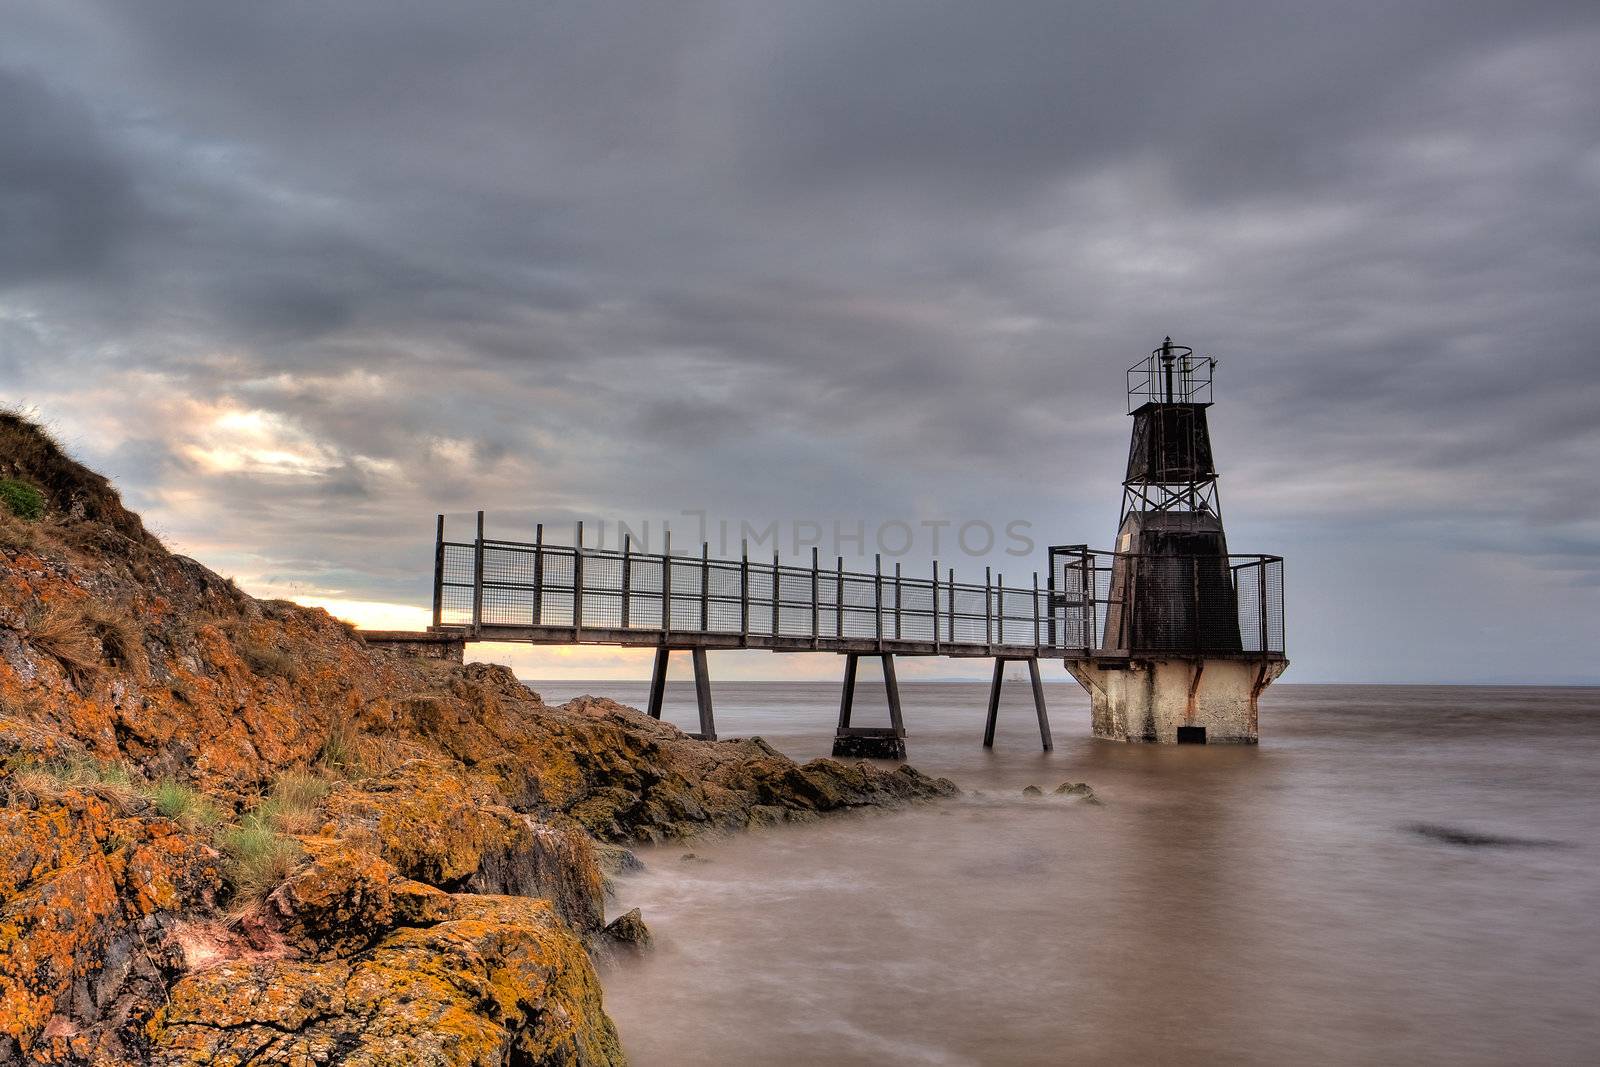 Battery Point at Portishead in North Somerset, England